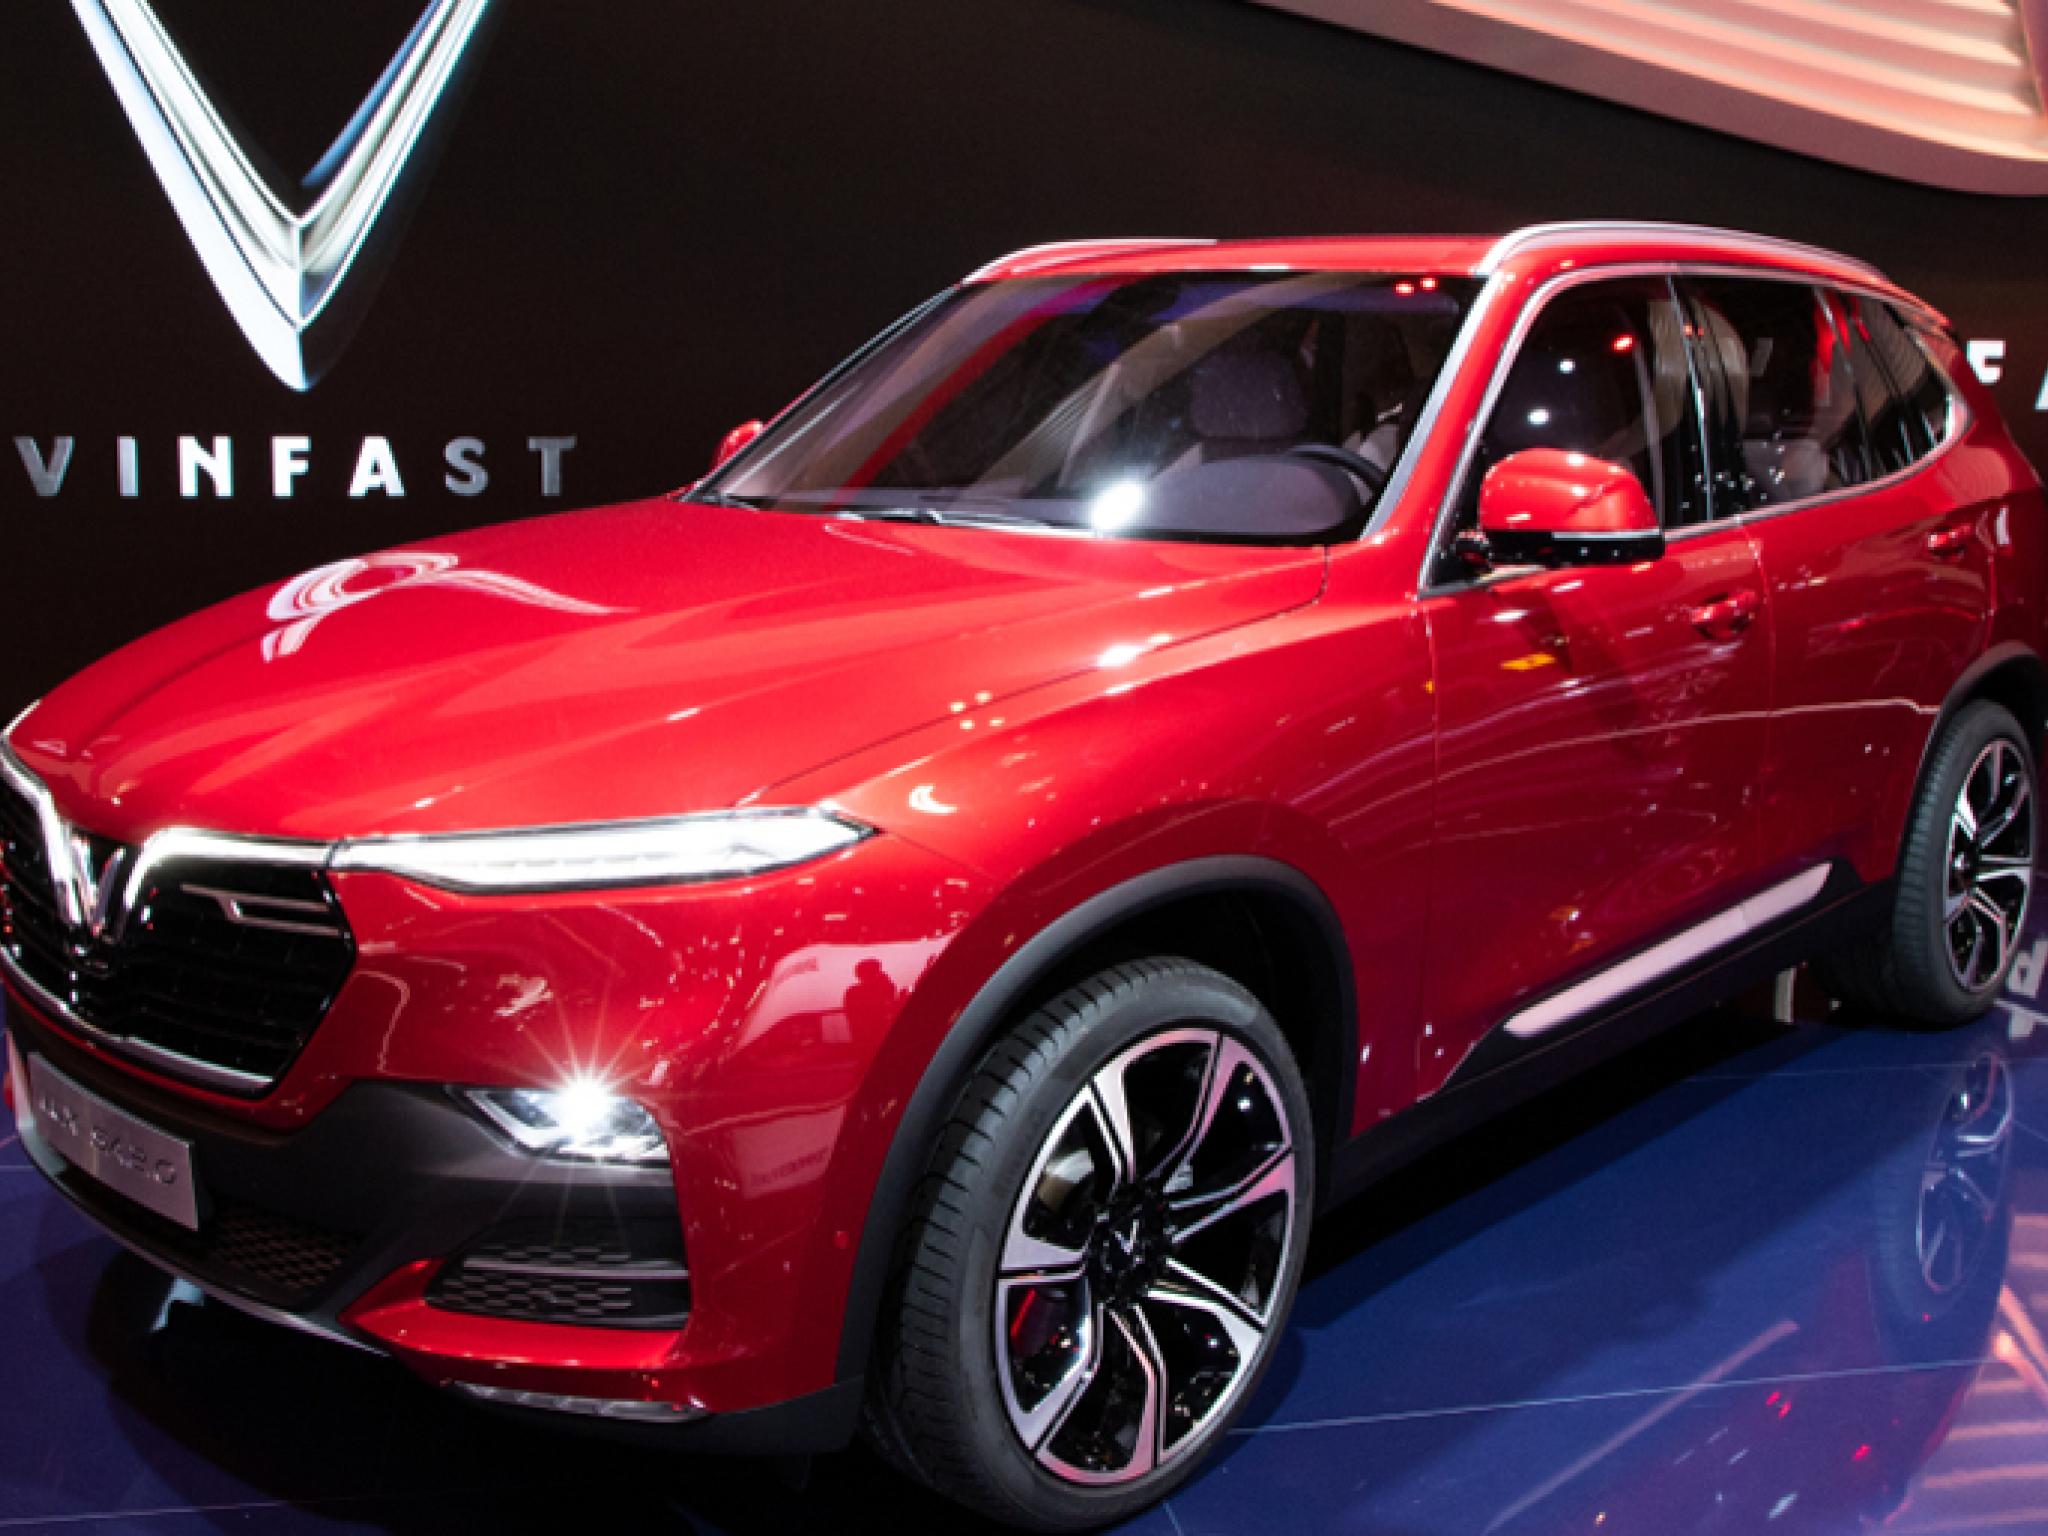  vinfast-vf8-suvs-face-recall-months-after-first-delivery 